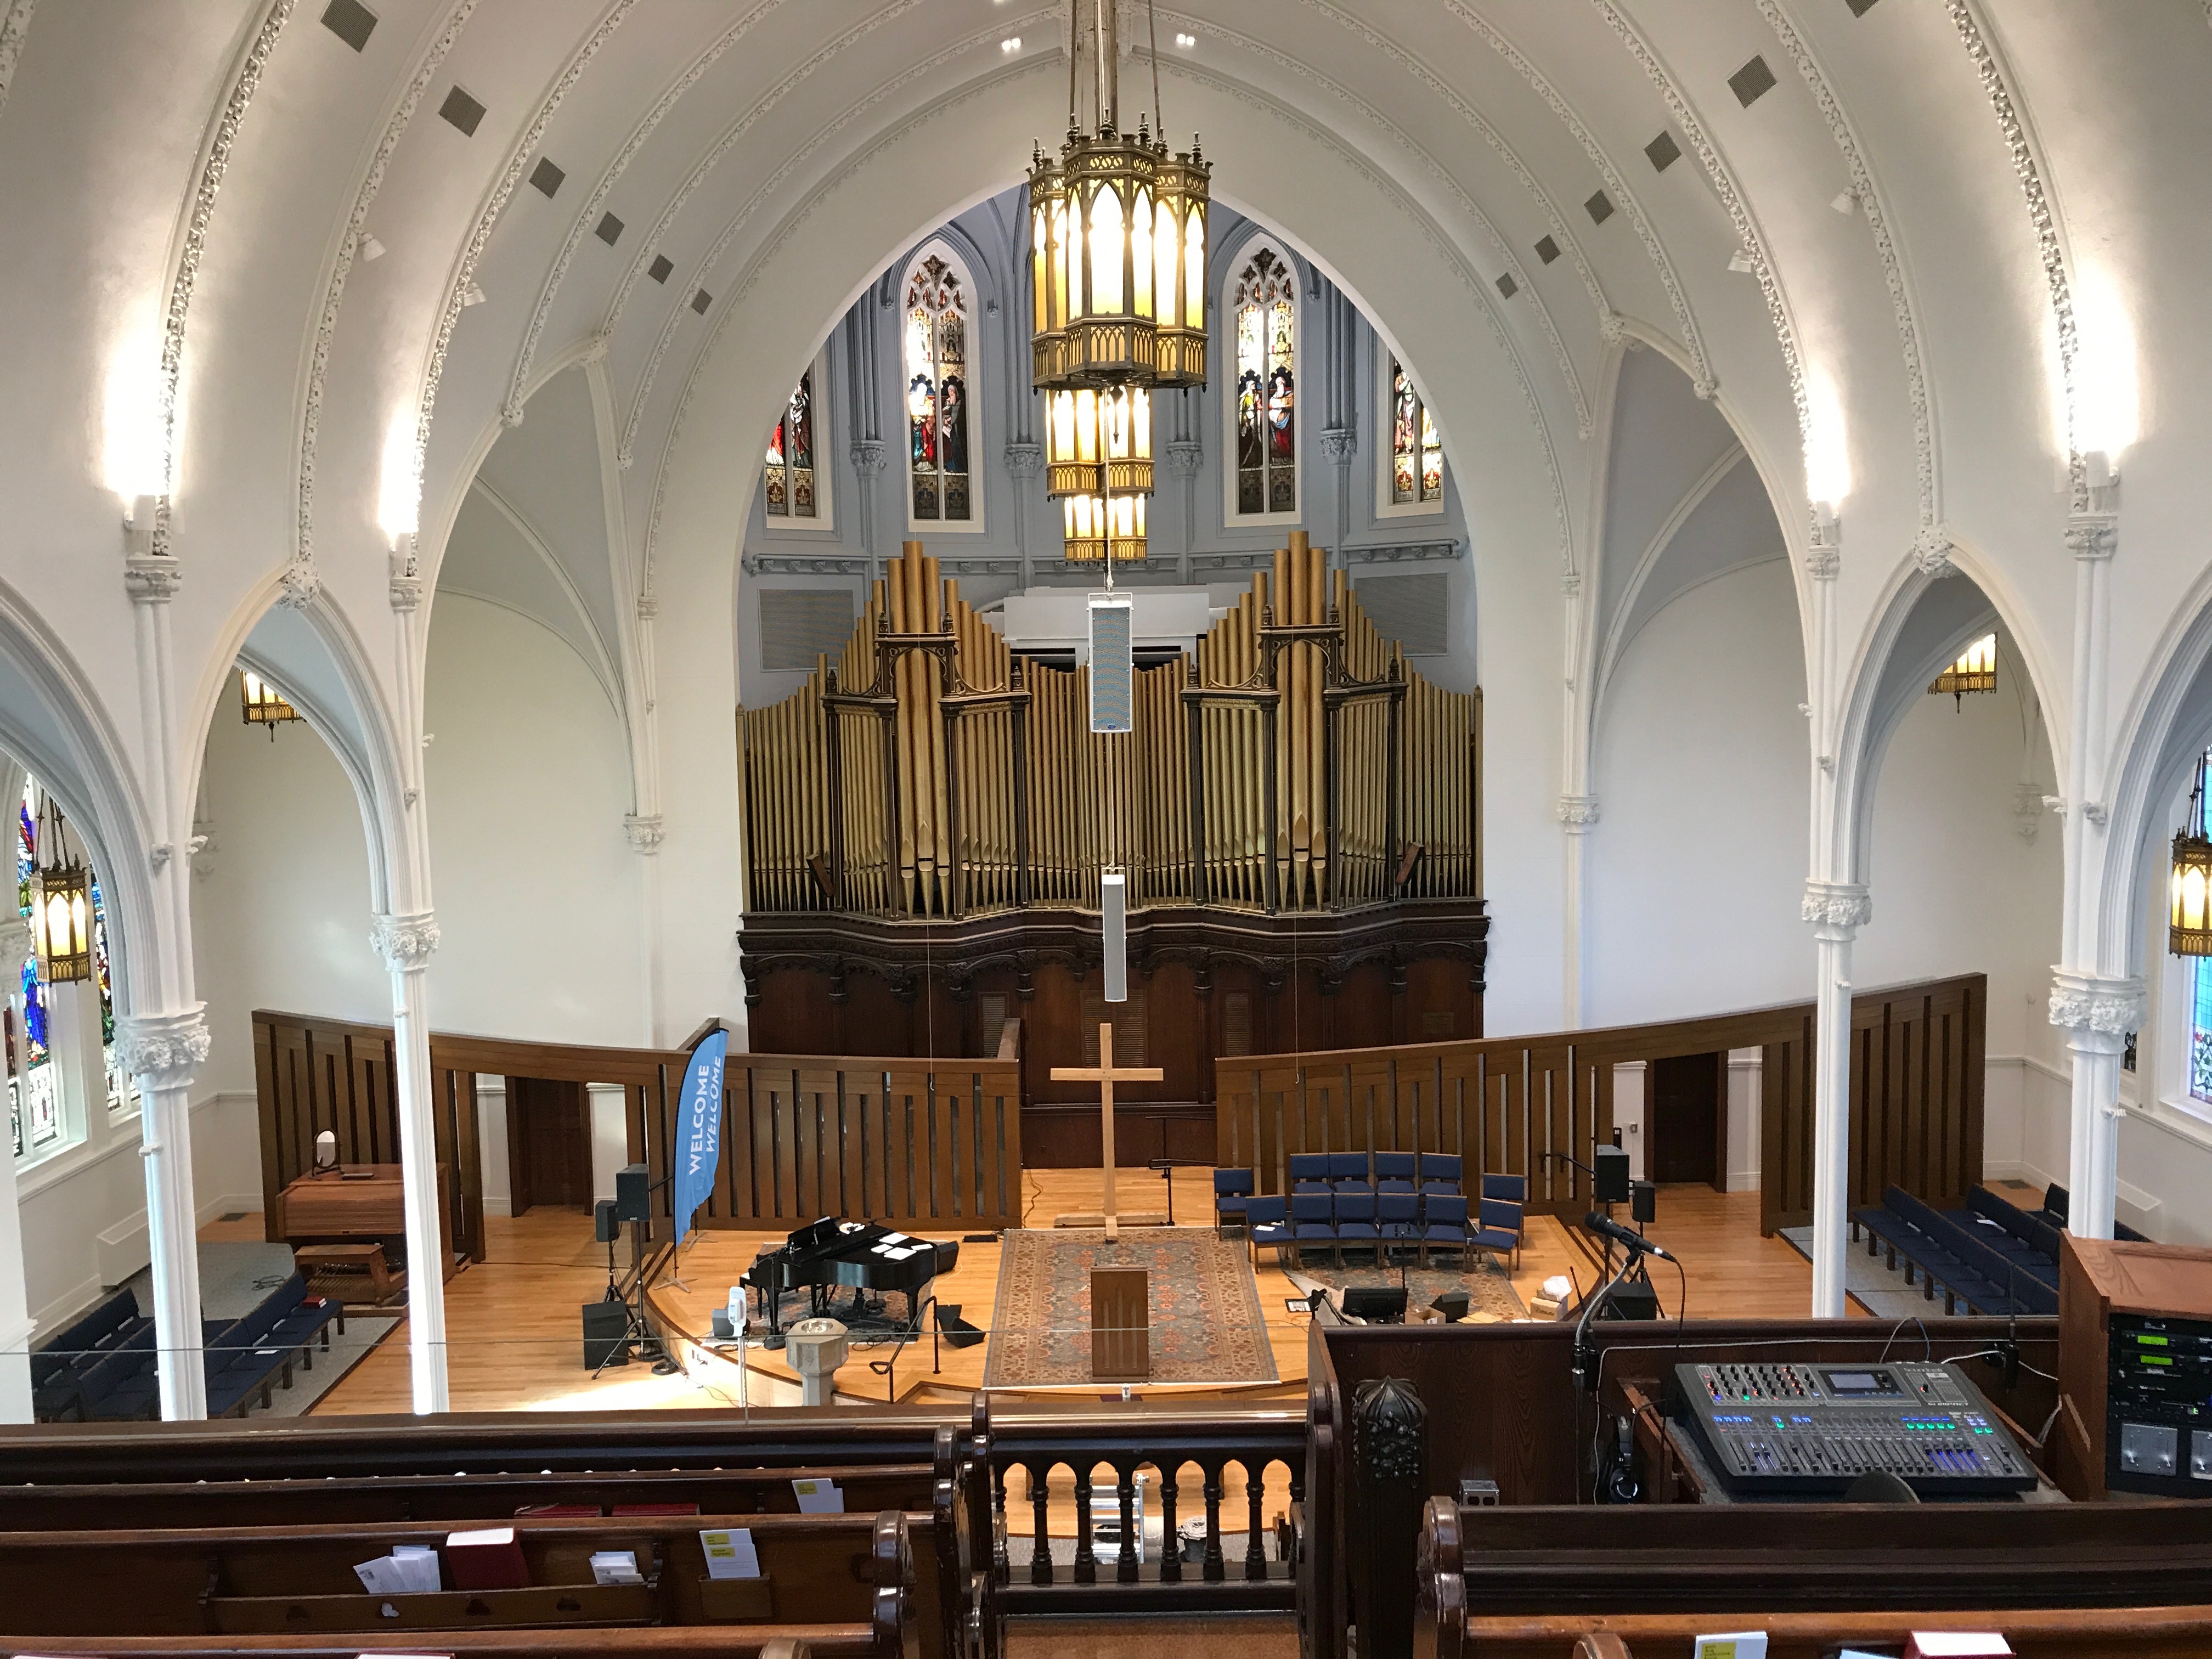 A Danley Sound Labs speaker mounted to a wall in a church sanctuary